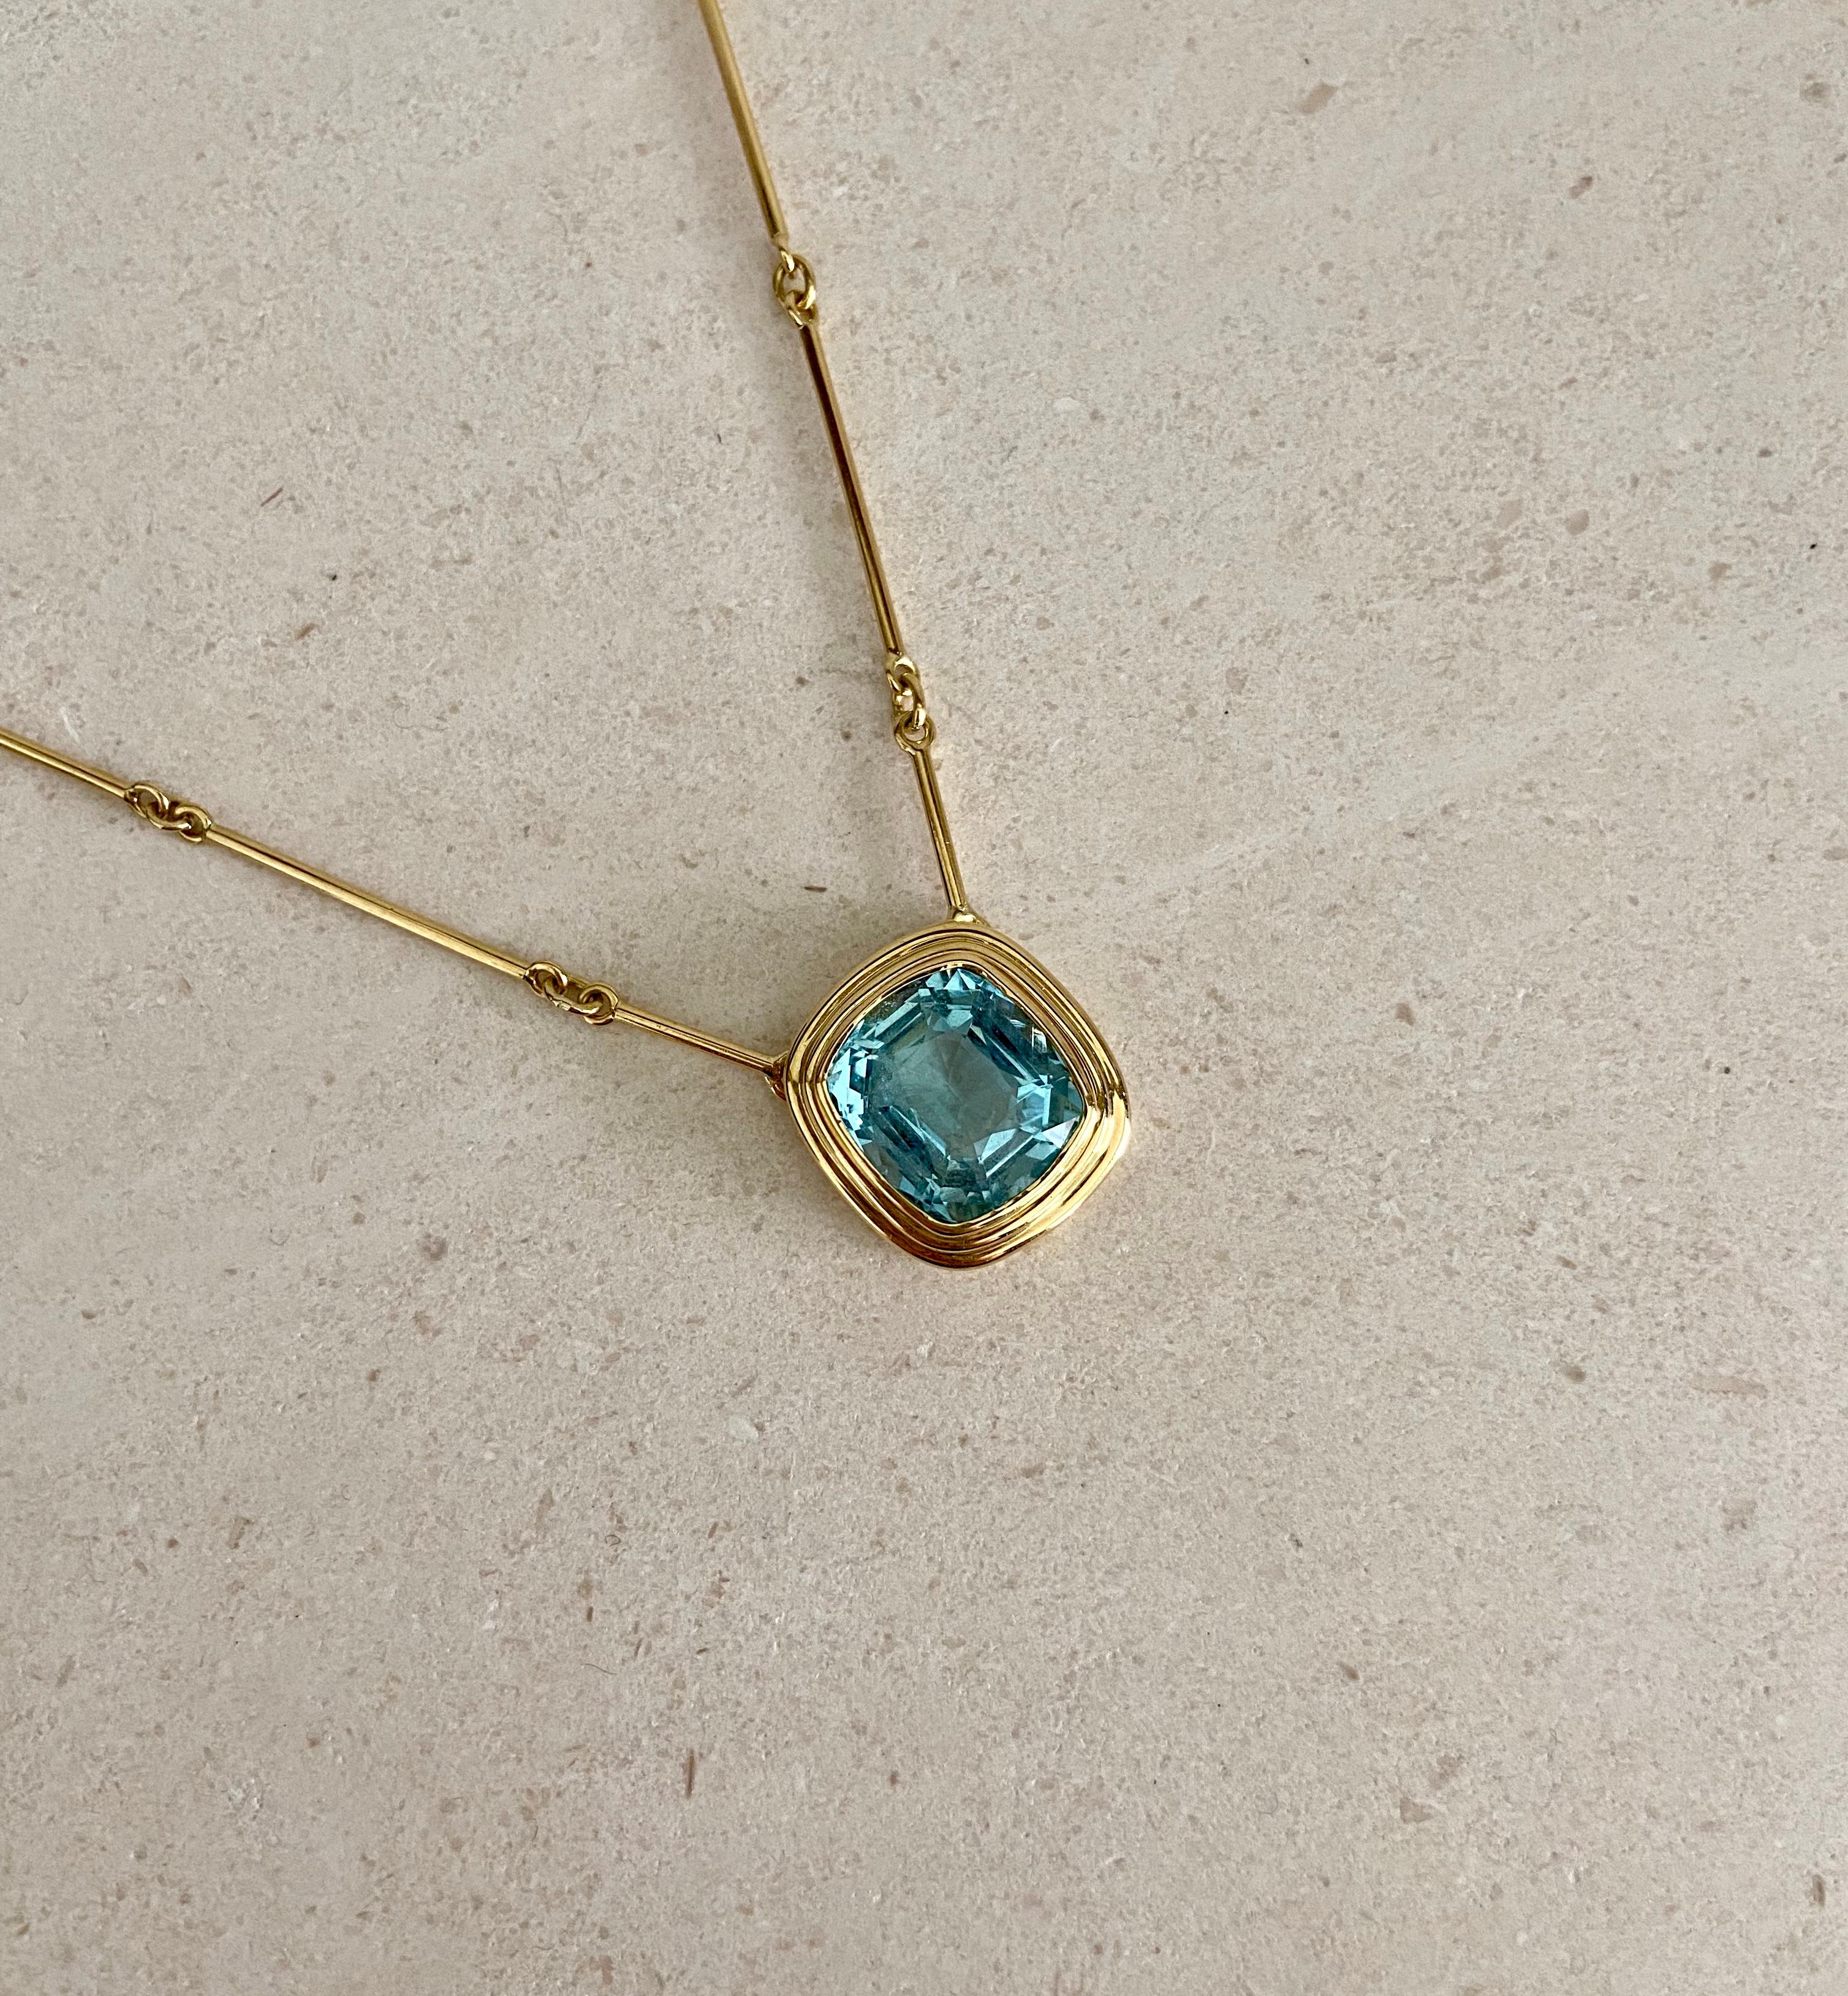 Certified 6.97 Carat Aquamarine Statement Necklace with 18 inch Gold Bar Chain In New Condition For Sale In London, GB